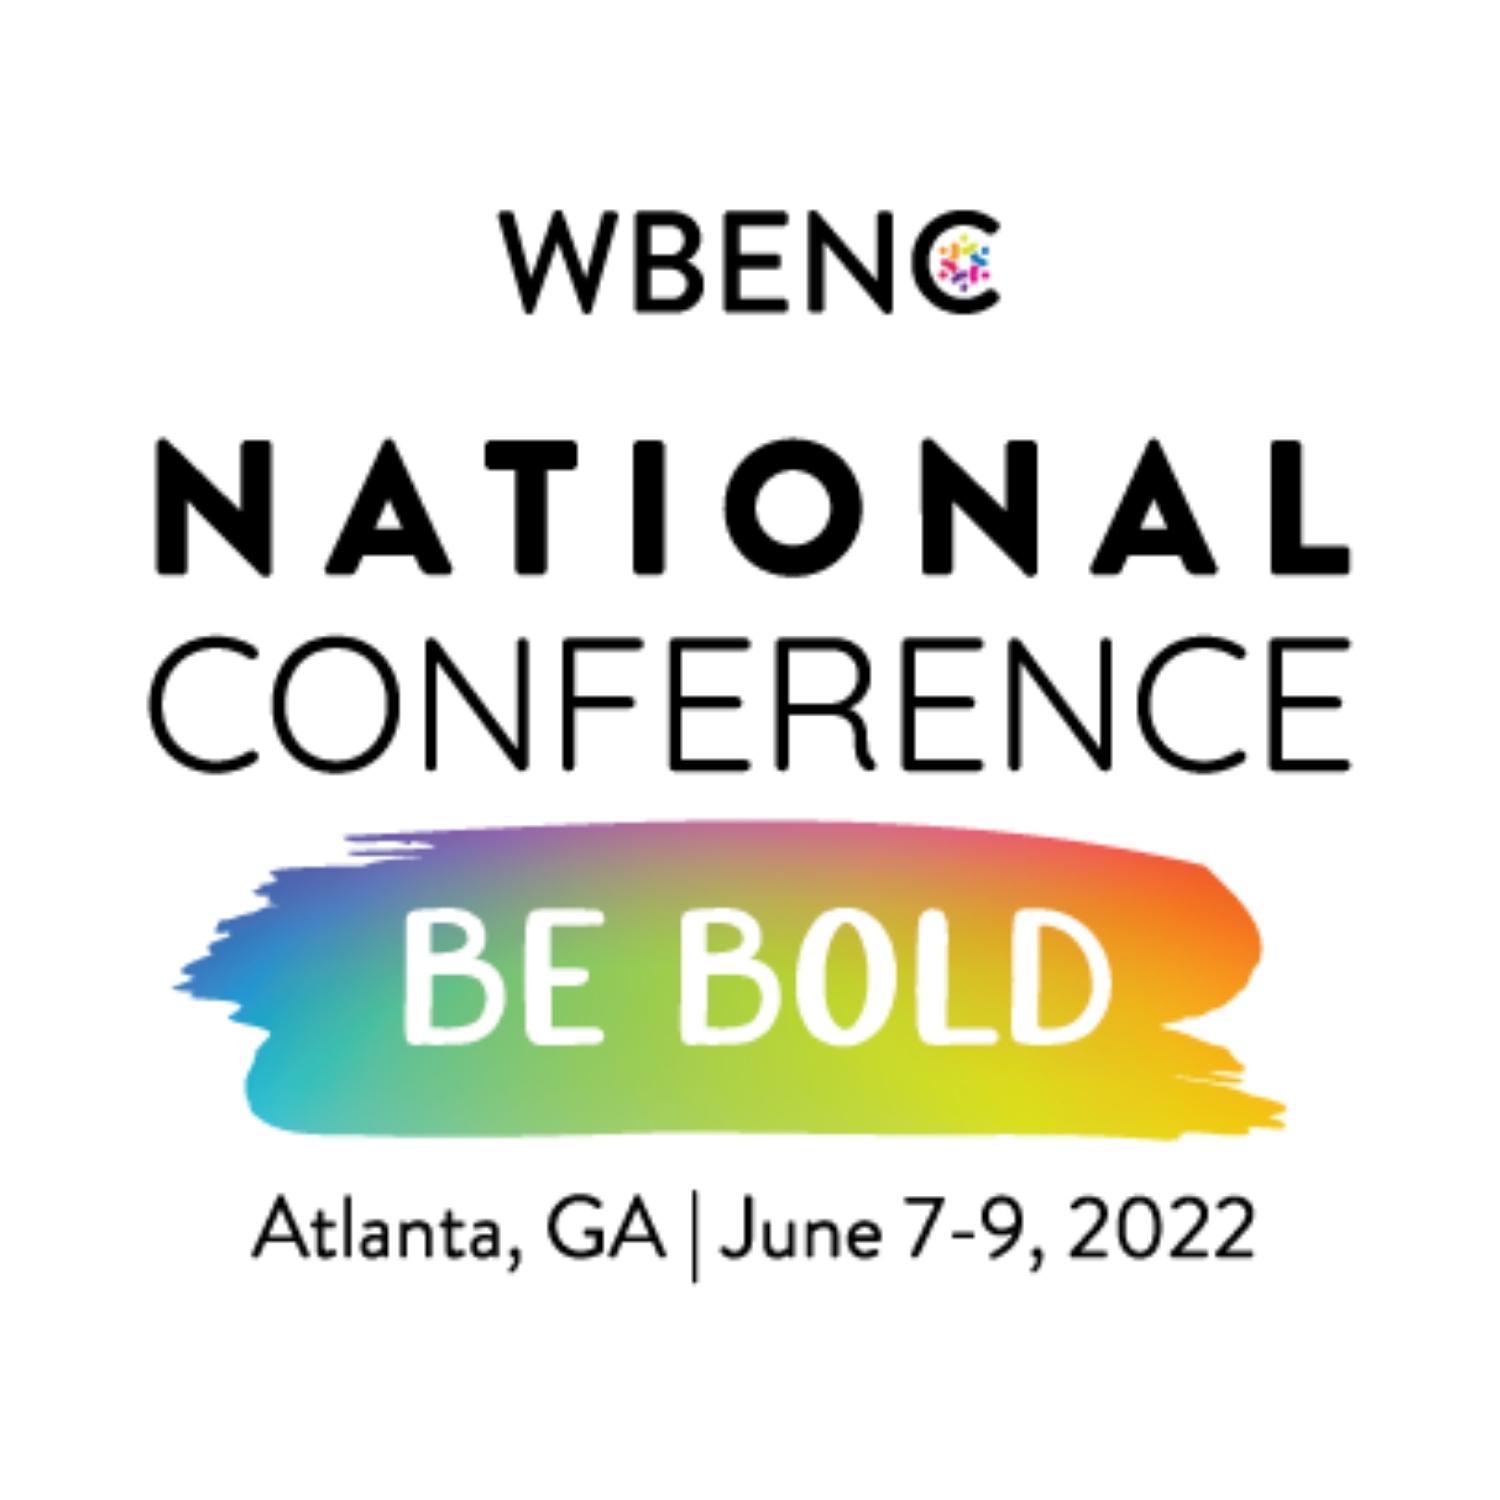 2022 WBENC National Conference - Business RadioX